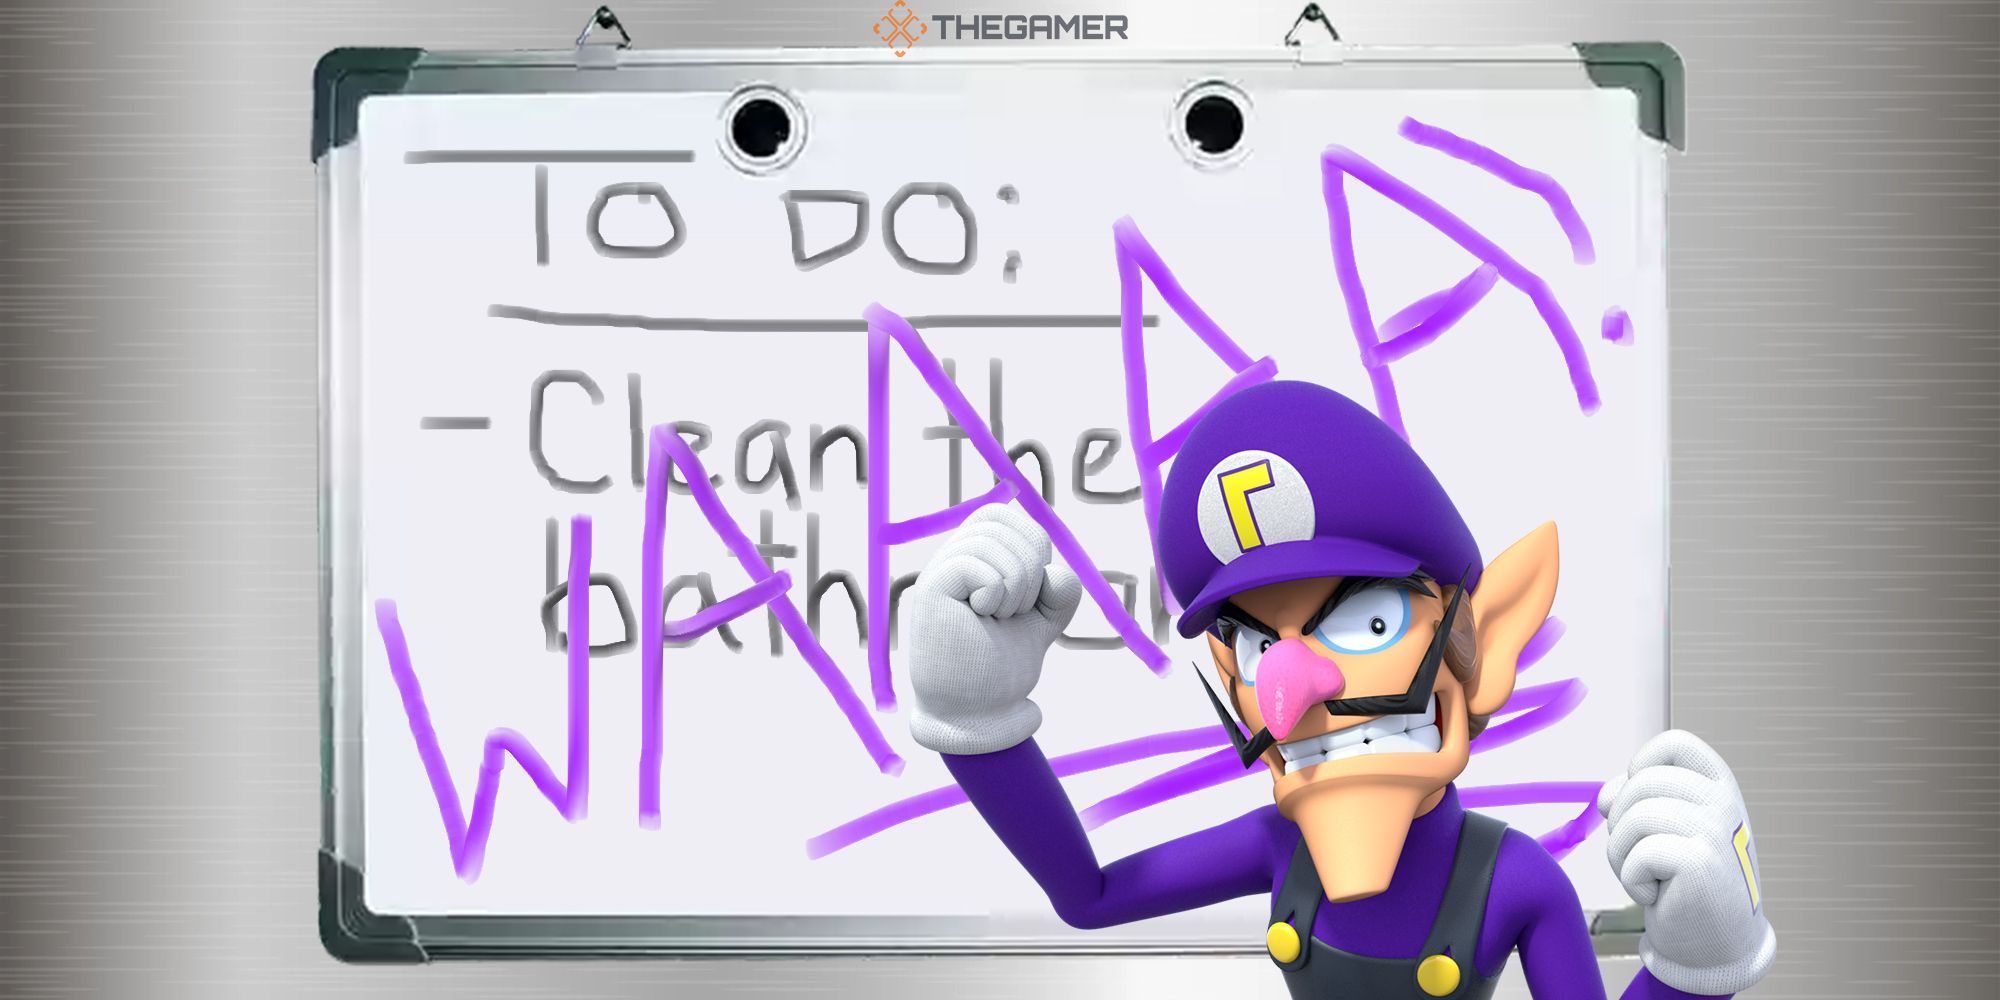 Waluigi stands in front of a refrigerator white board after writing over the roommate to-do list with his irritating catchphrase.